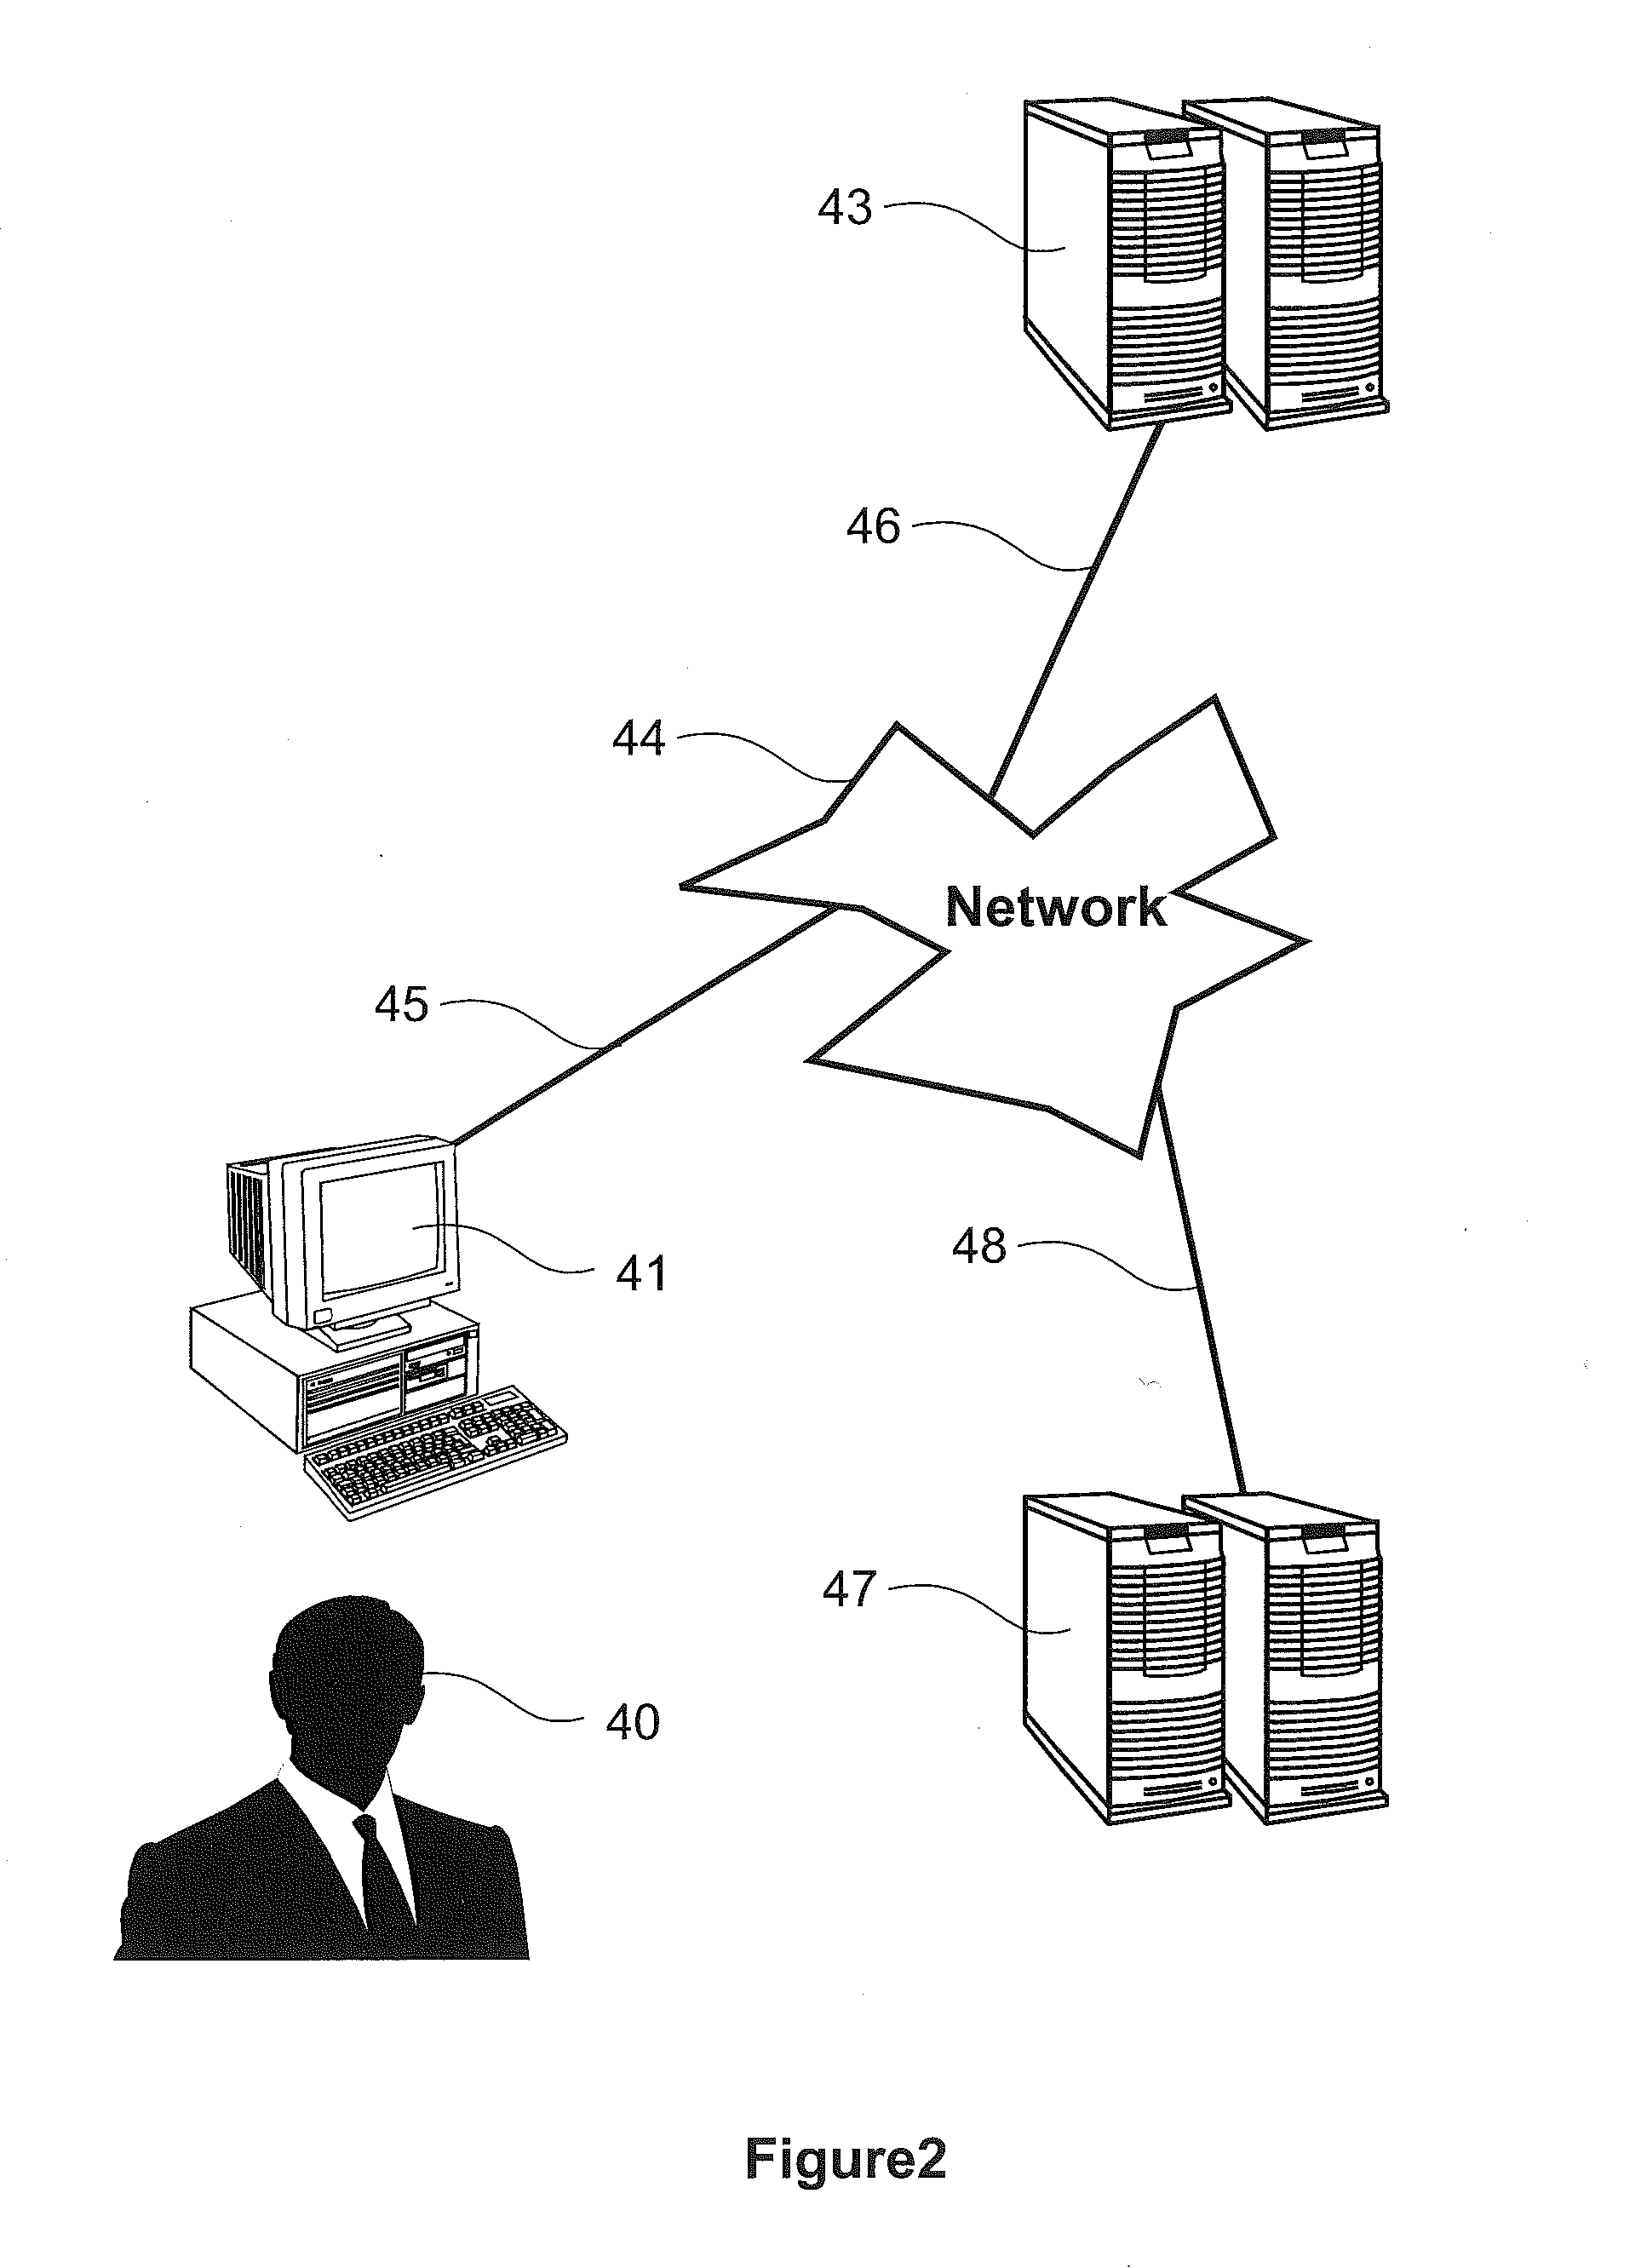 System and methods for screening, treating, and monitoring psychological conditions